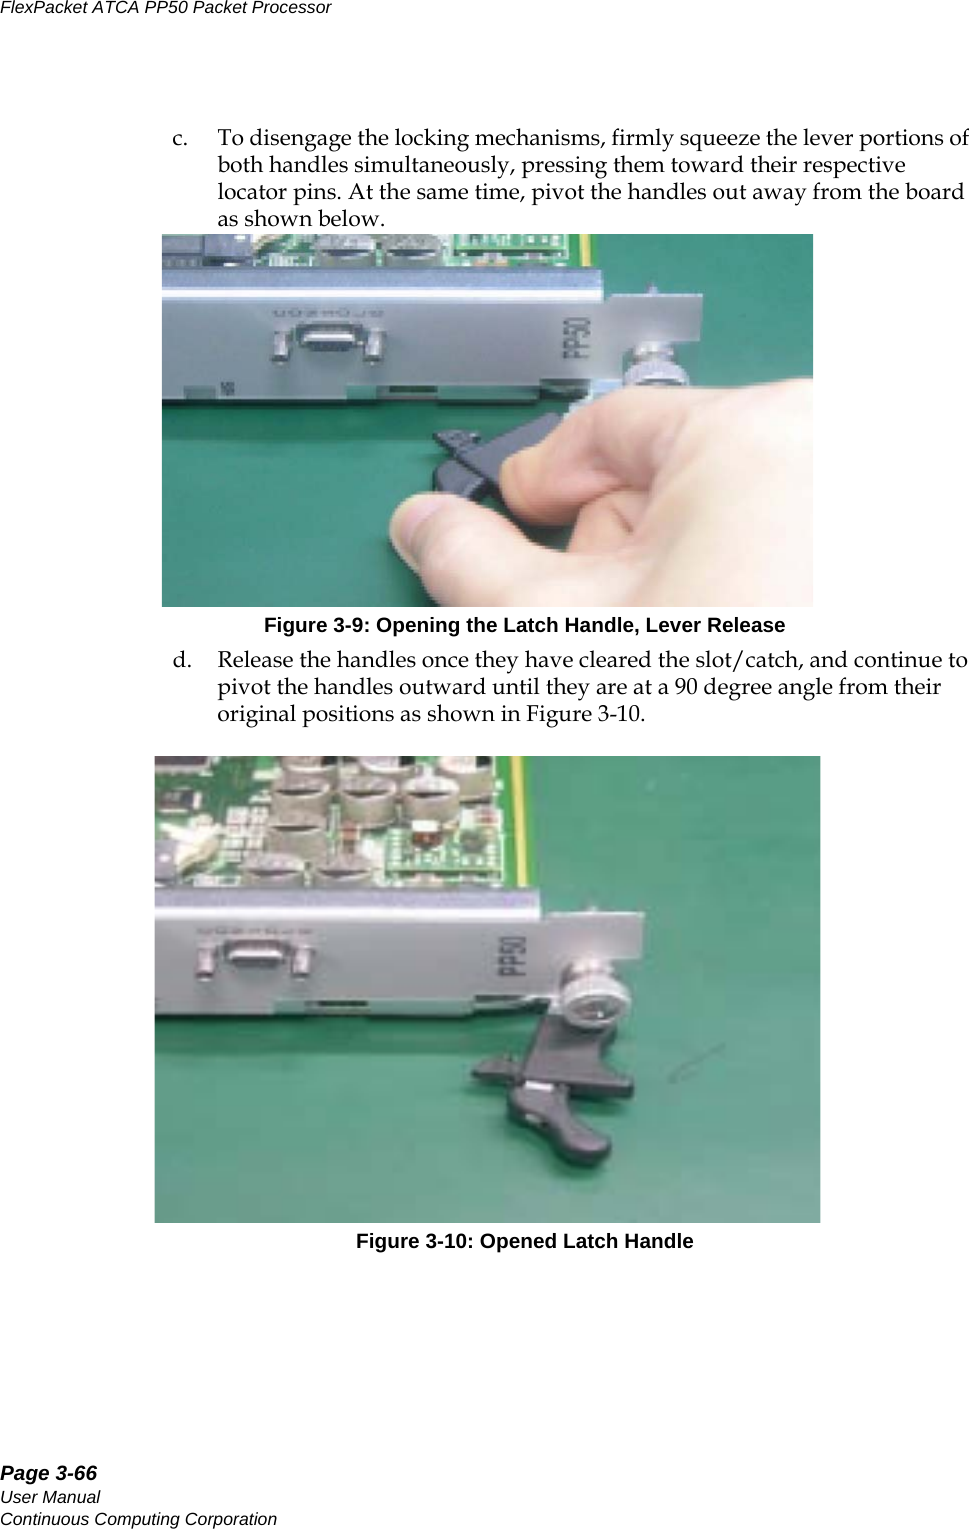 Page 3-66User ManualContinuous Computing CorporationFlexPacket ATCA PP50 Packet Processor     Preliminaryc. To disengage the locking mechanisms, firmly squeeze the lever portions of both handles simultaneously, pressing them toward their respective locator pins. At the same time, pivot the handles out away from the board as shown below.Figure 3-9: Opening the Latch Handle, Lever Released. Release the handles once they have cleared the slot/catch, and continue to pivot the handles outward until they are at a 90 degree angle from their original positions as shown in Figure 3-10. Figure 3-10: Opened Latch Handle